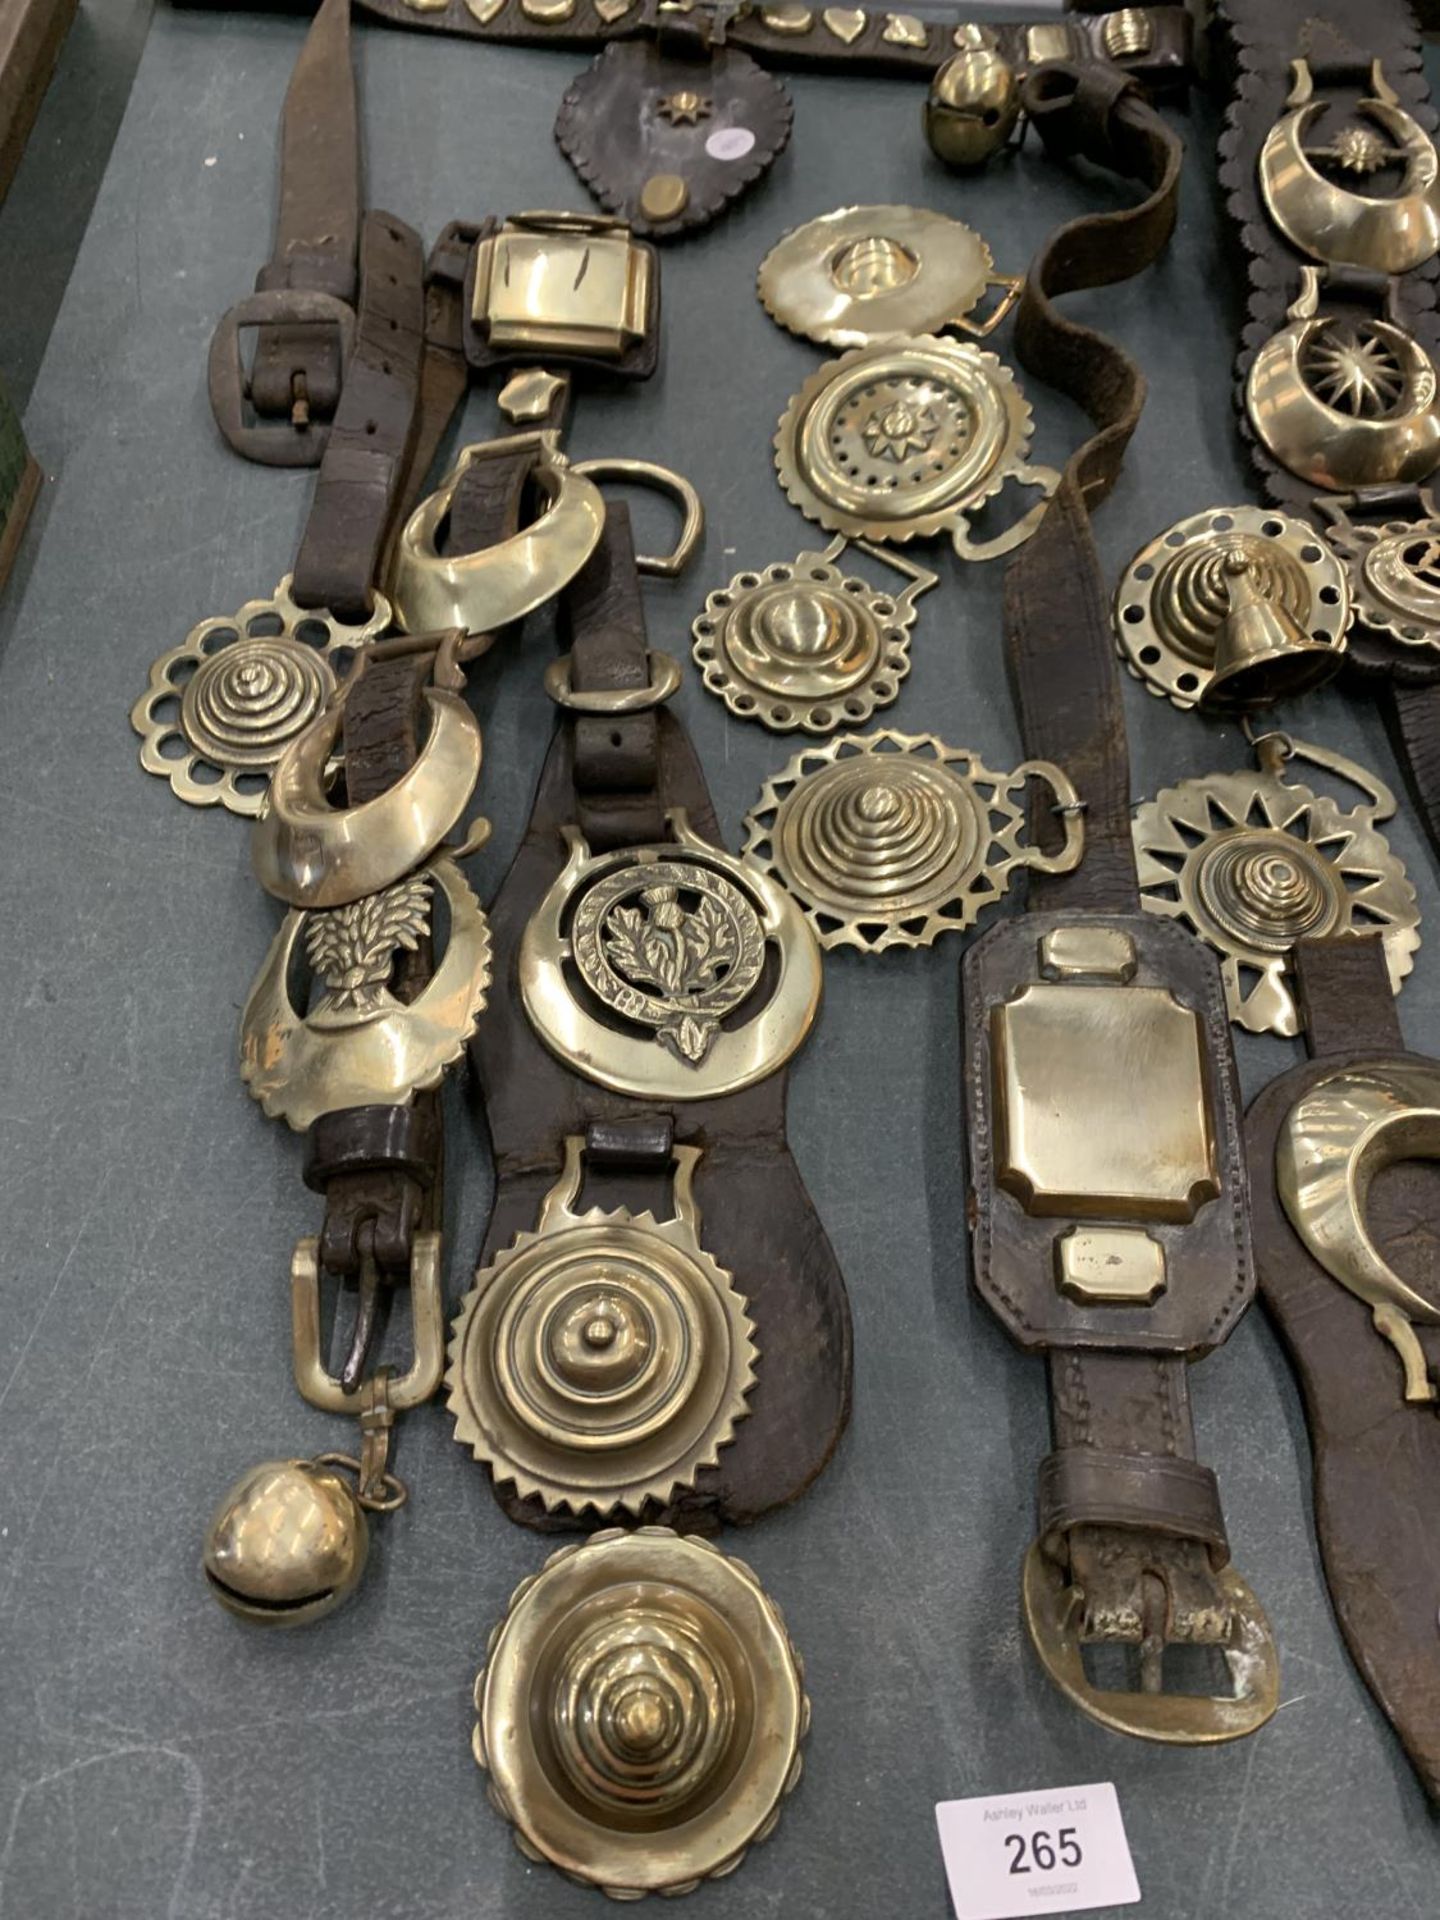 A LARGE COLLECTION OF HORSE BRASSES, SOME ON LEATHER STRAPS - Image 2 of 5